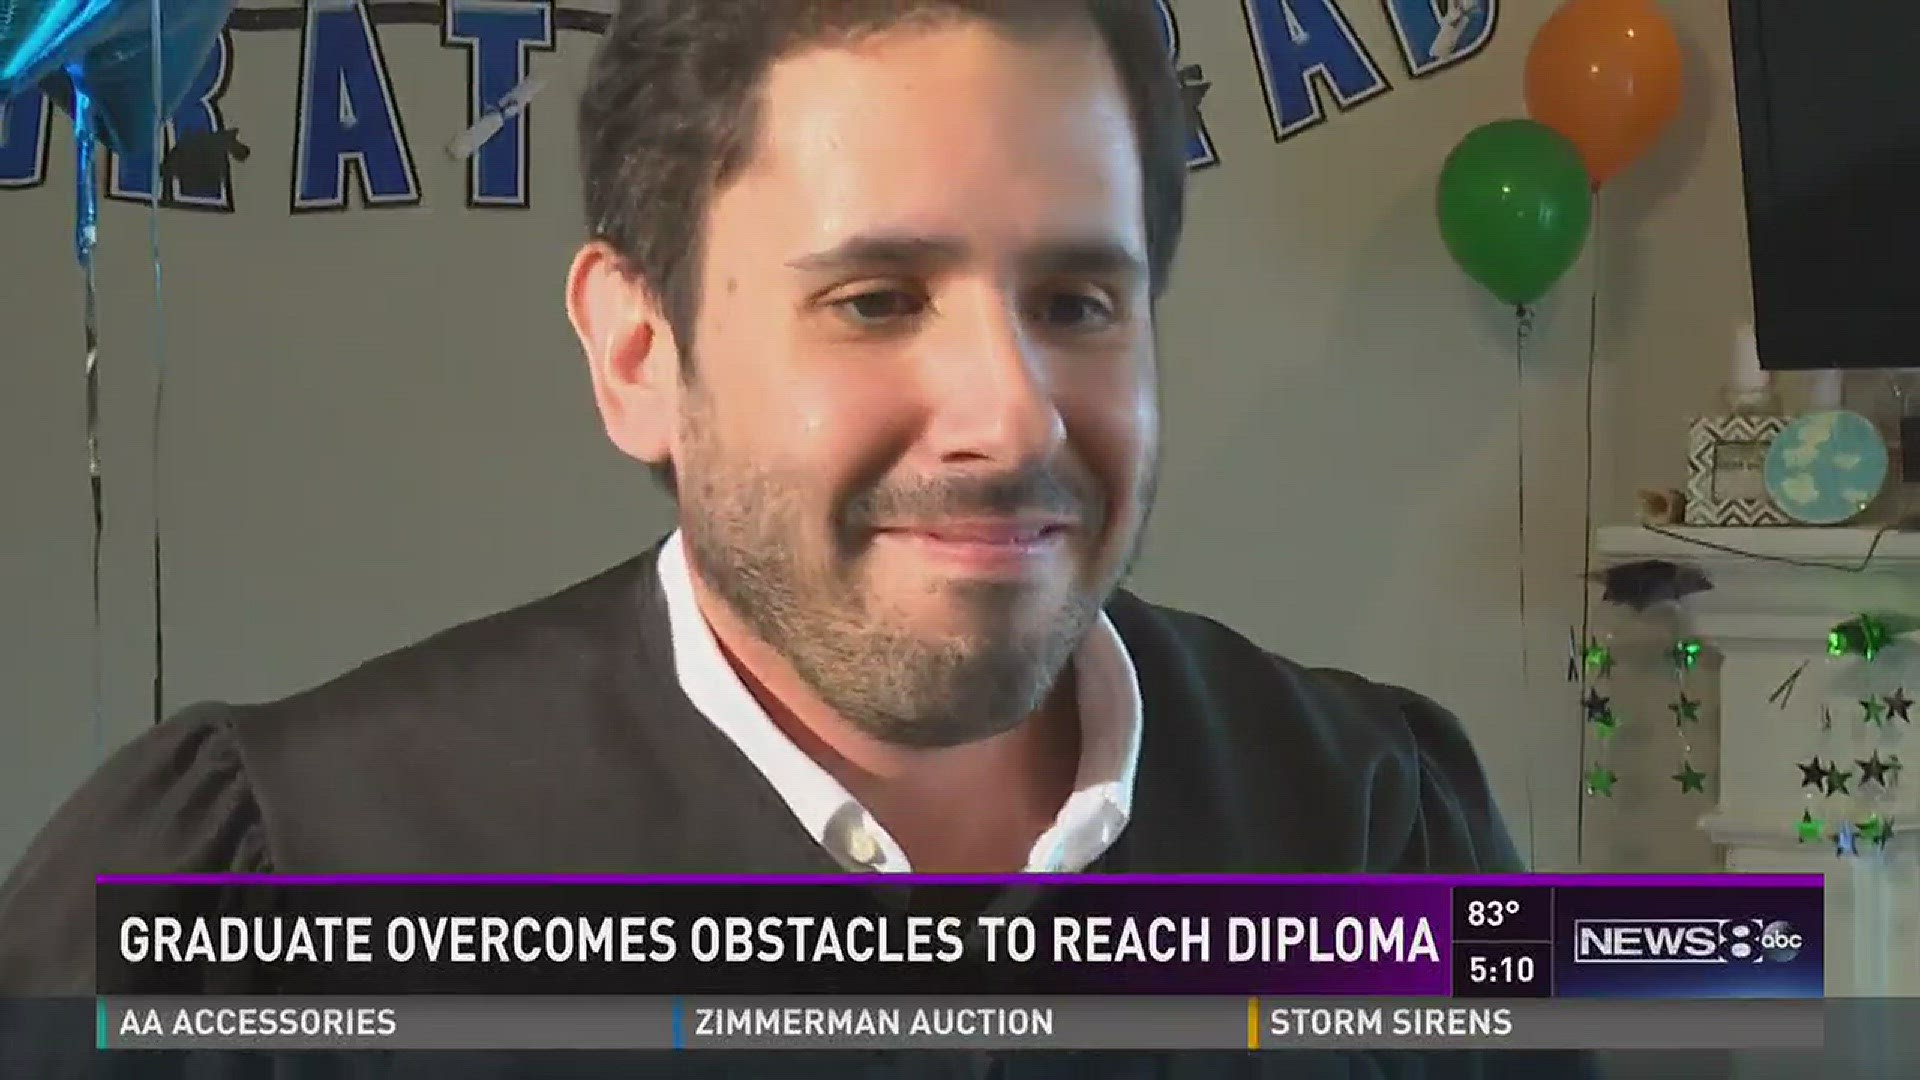 Graduate overcomes obstacles to reach diploma